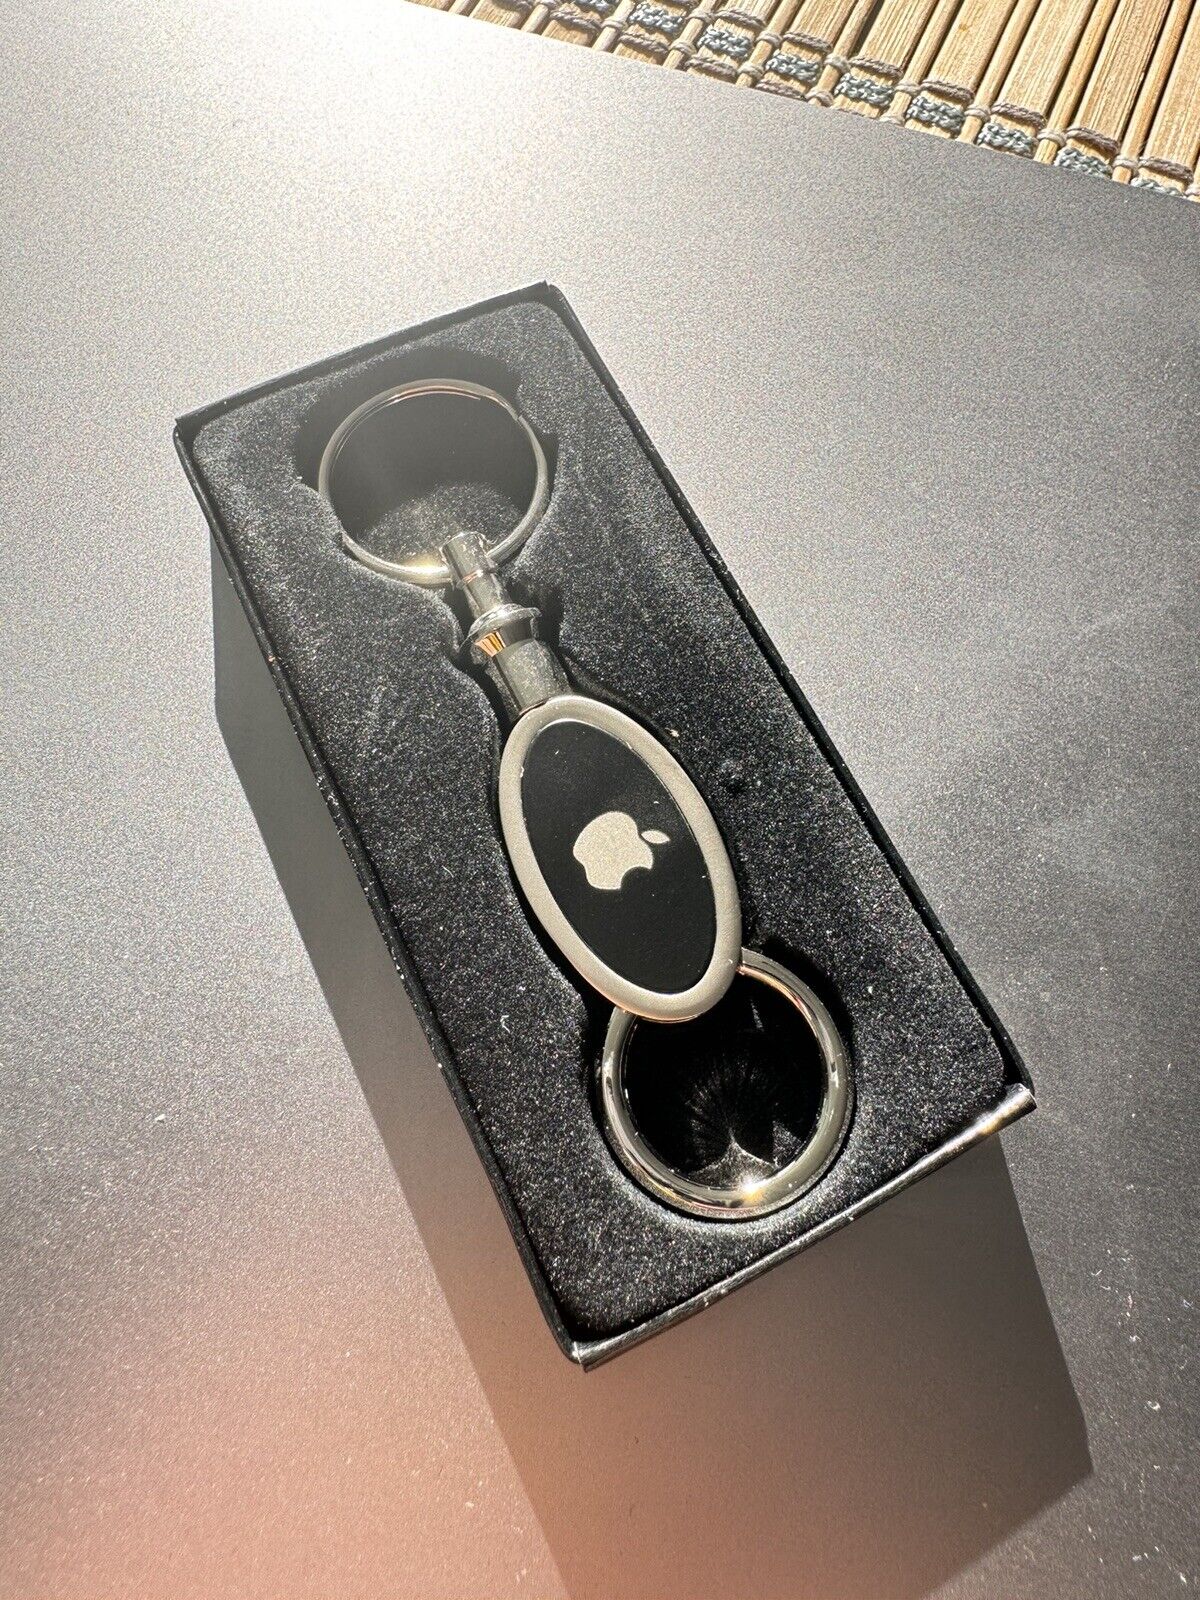 OOP APPLE COMPANY STORE HQ OVAL BLACK w/SILVER LOGO VALET 2 RINGS KEY CHAIN FOB